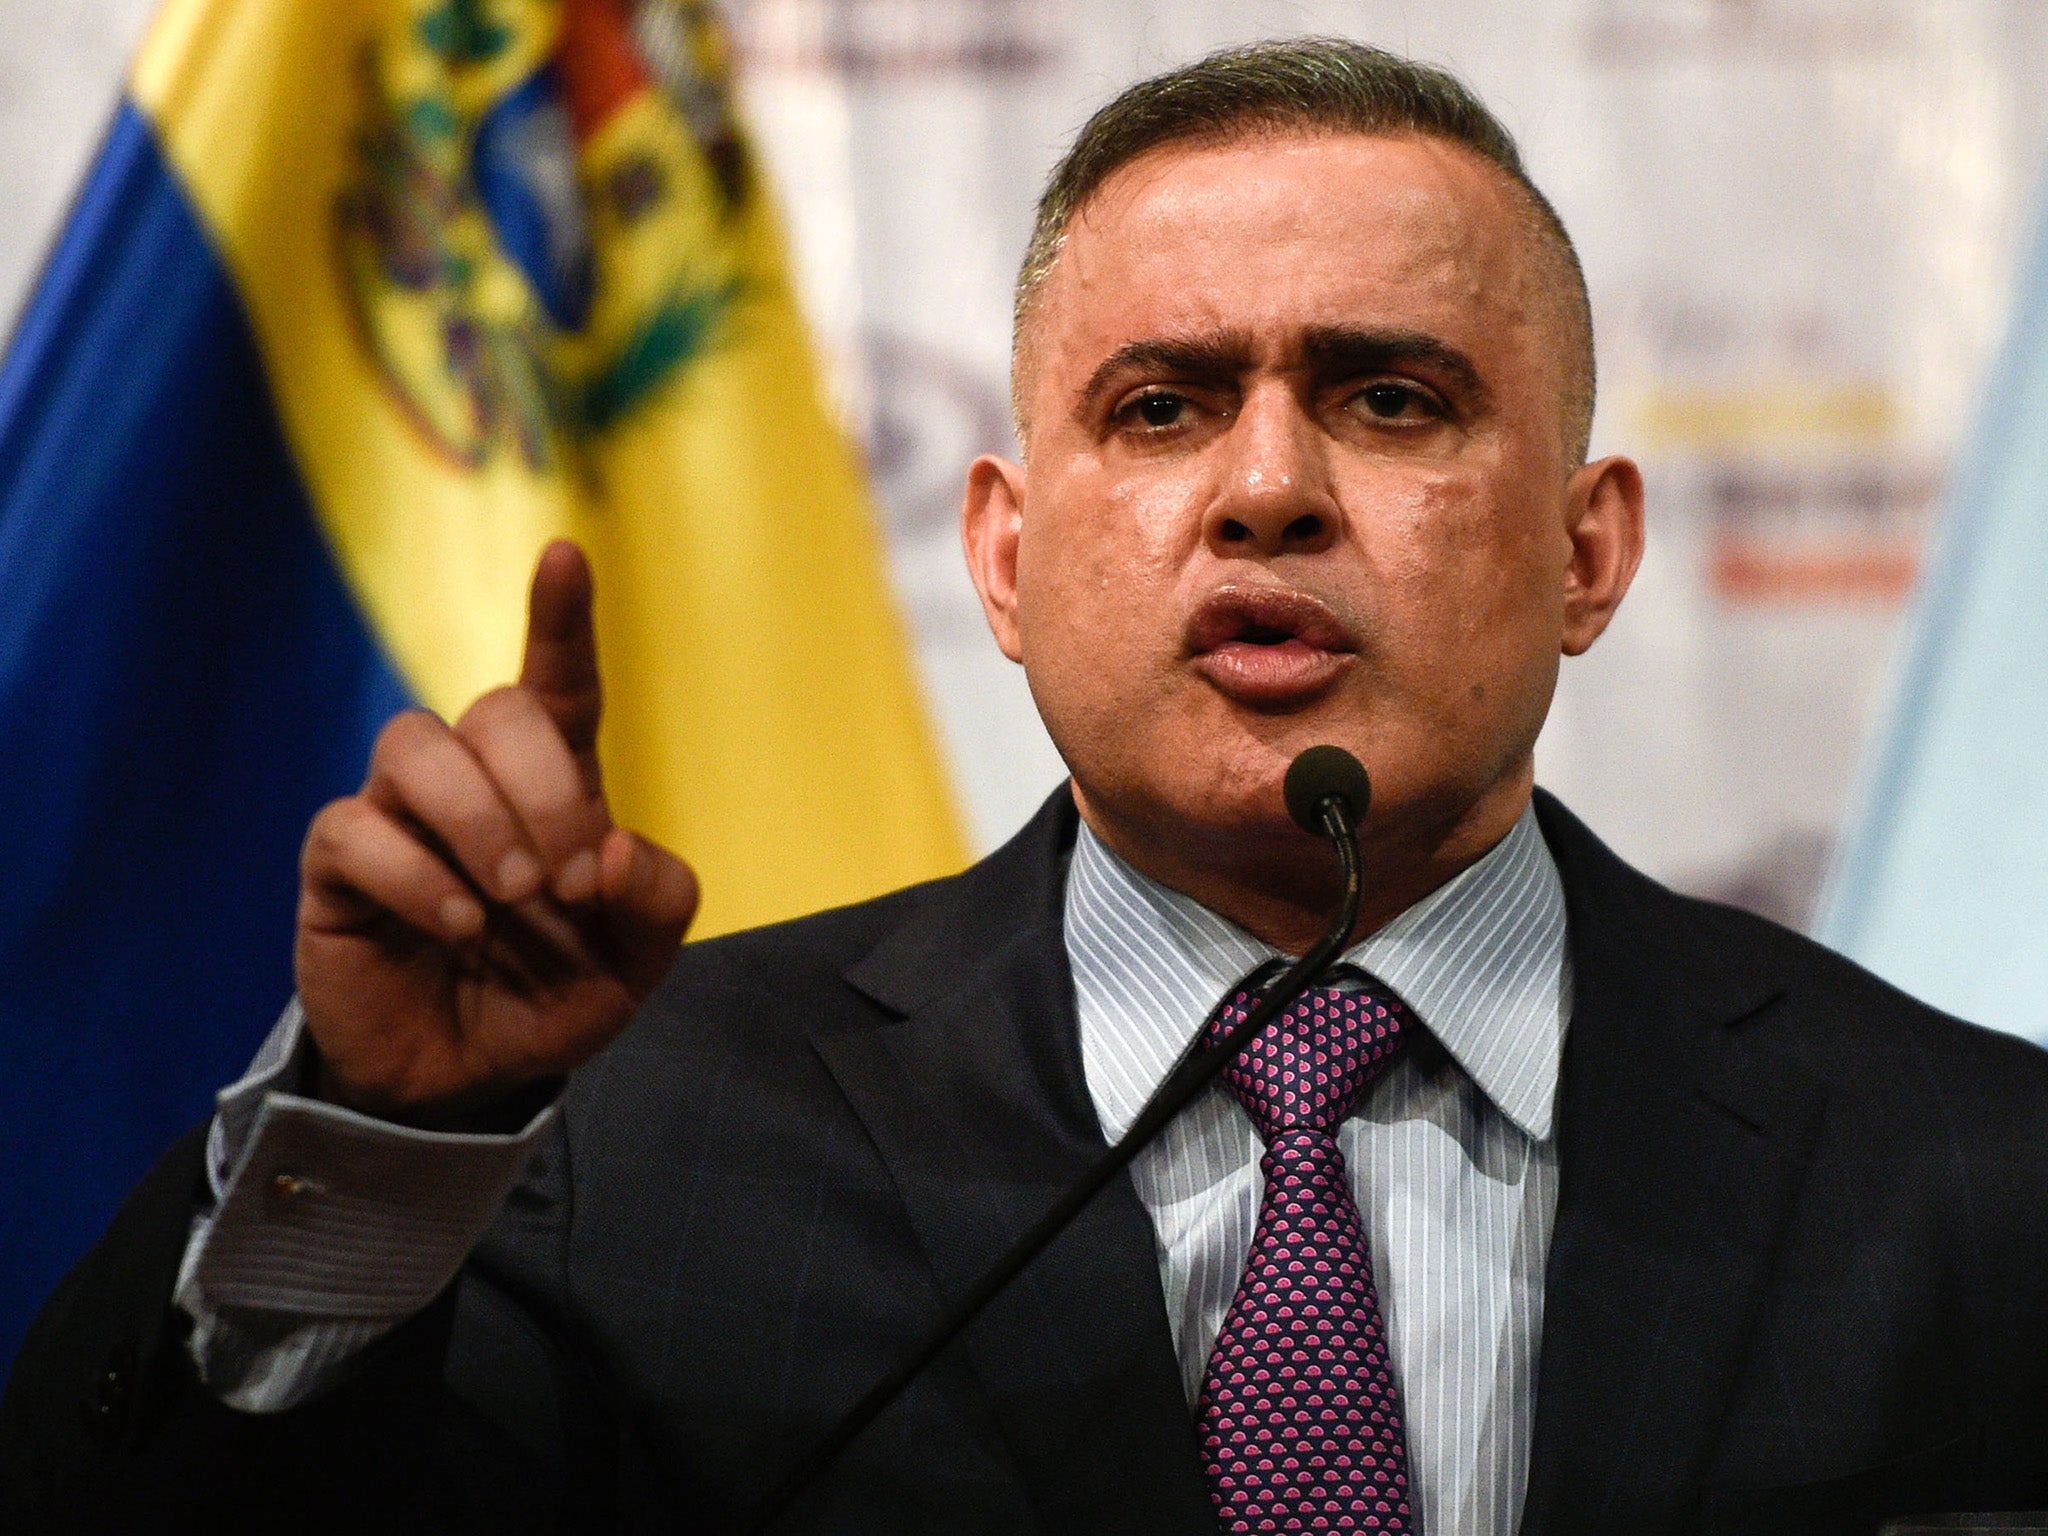 Colonel Pedro Zambrano and general Alejandro Pérez appeared in court on Monday, chief prosecutor Tarek William Saab (pictured) said in a speech